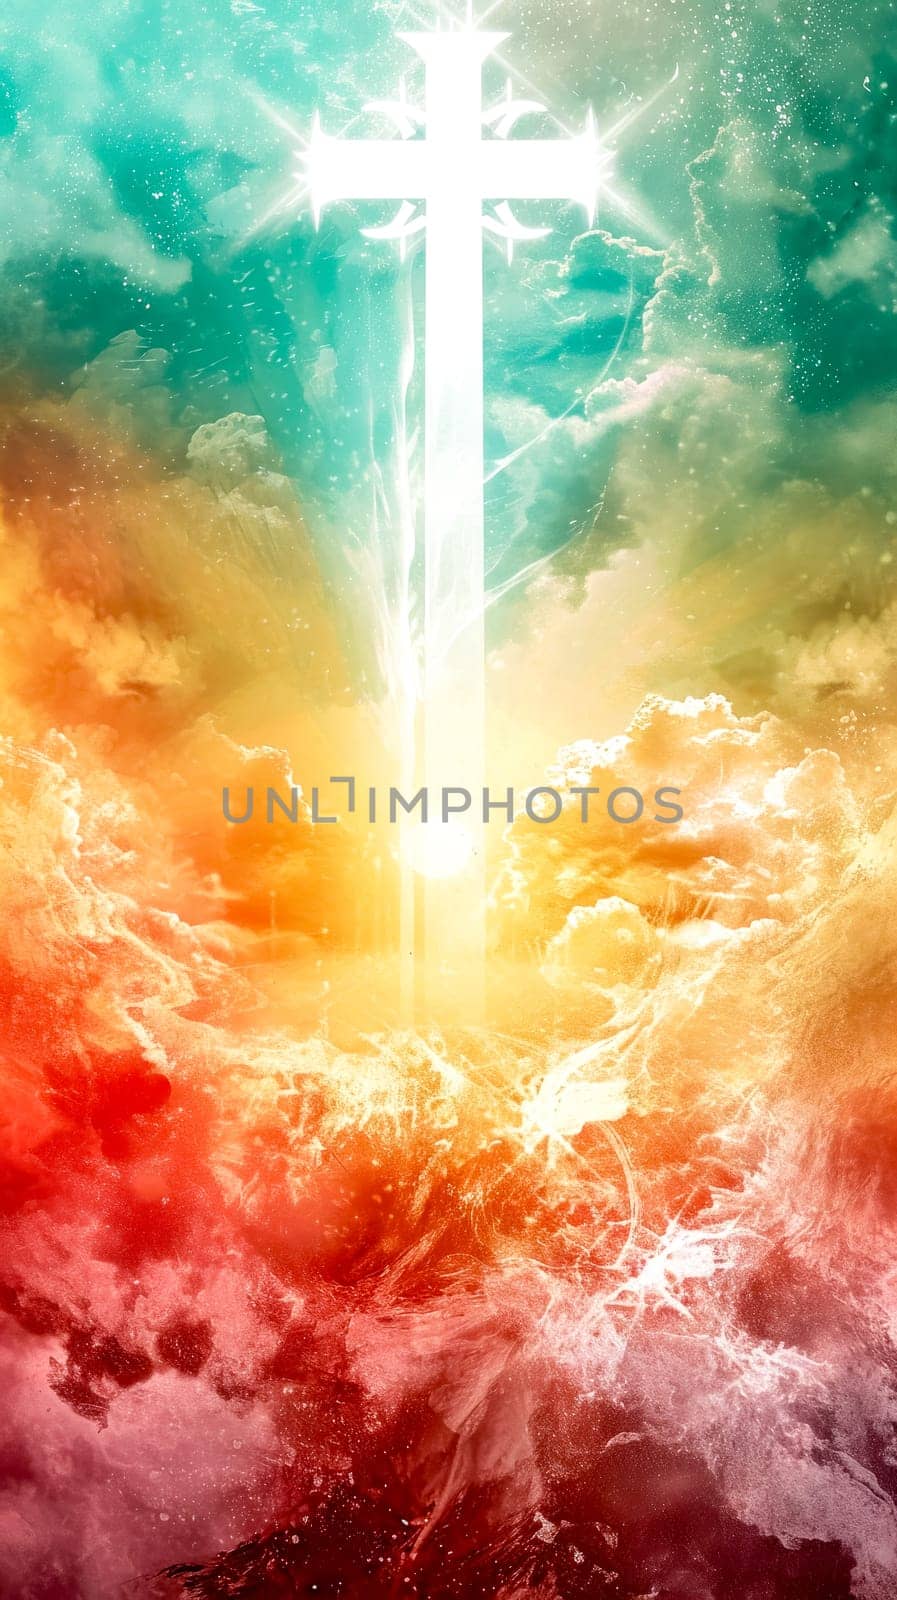 radiant cross illuminating a tumultuous sky with swirling clouds and beams of light, symbolizing hope, faith, and spiritual awakening against a backdrop of chaos and beauty. vertical